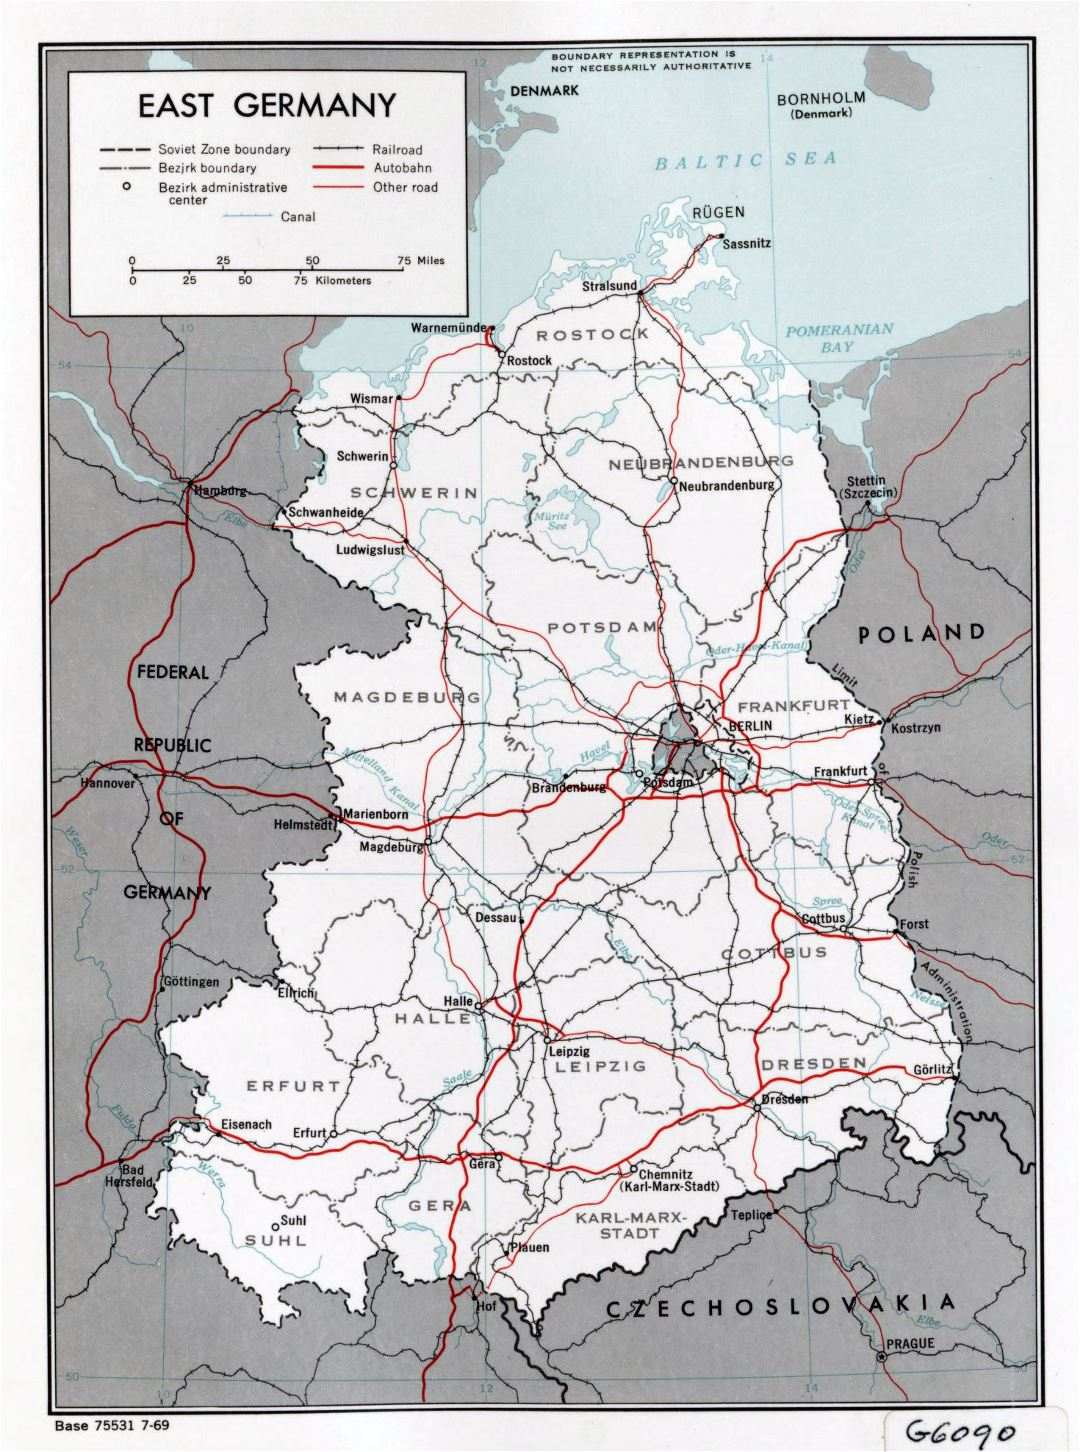 Large political and administrative map of East Germany with roads, railroads and major cities - 1969